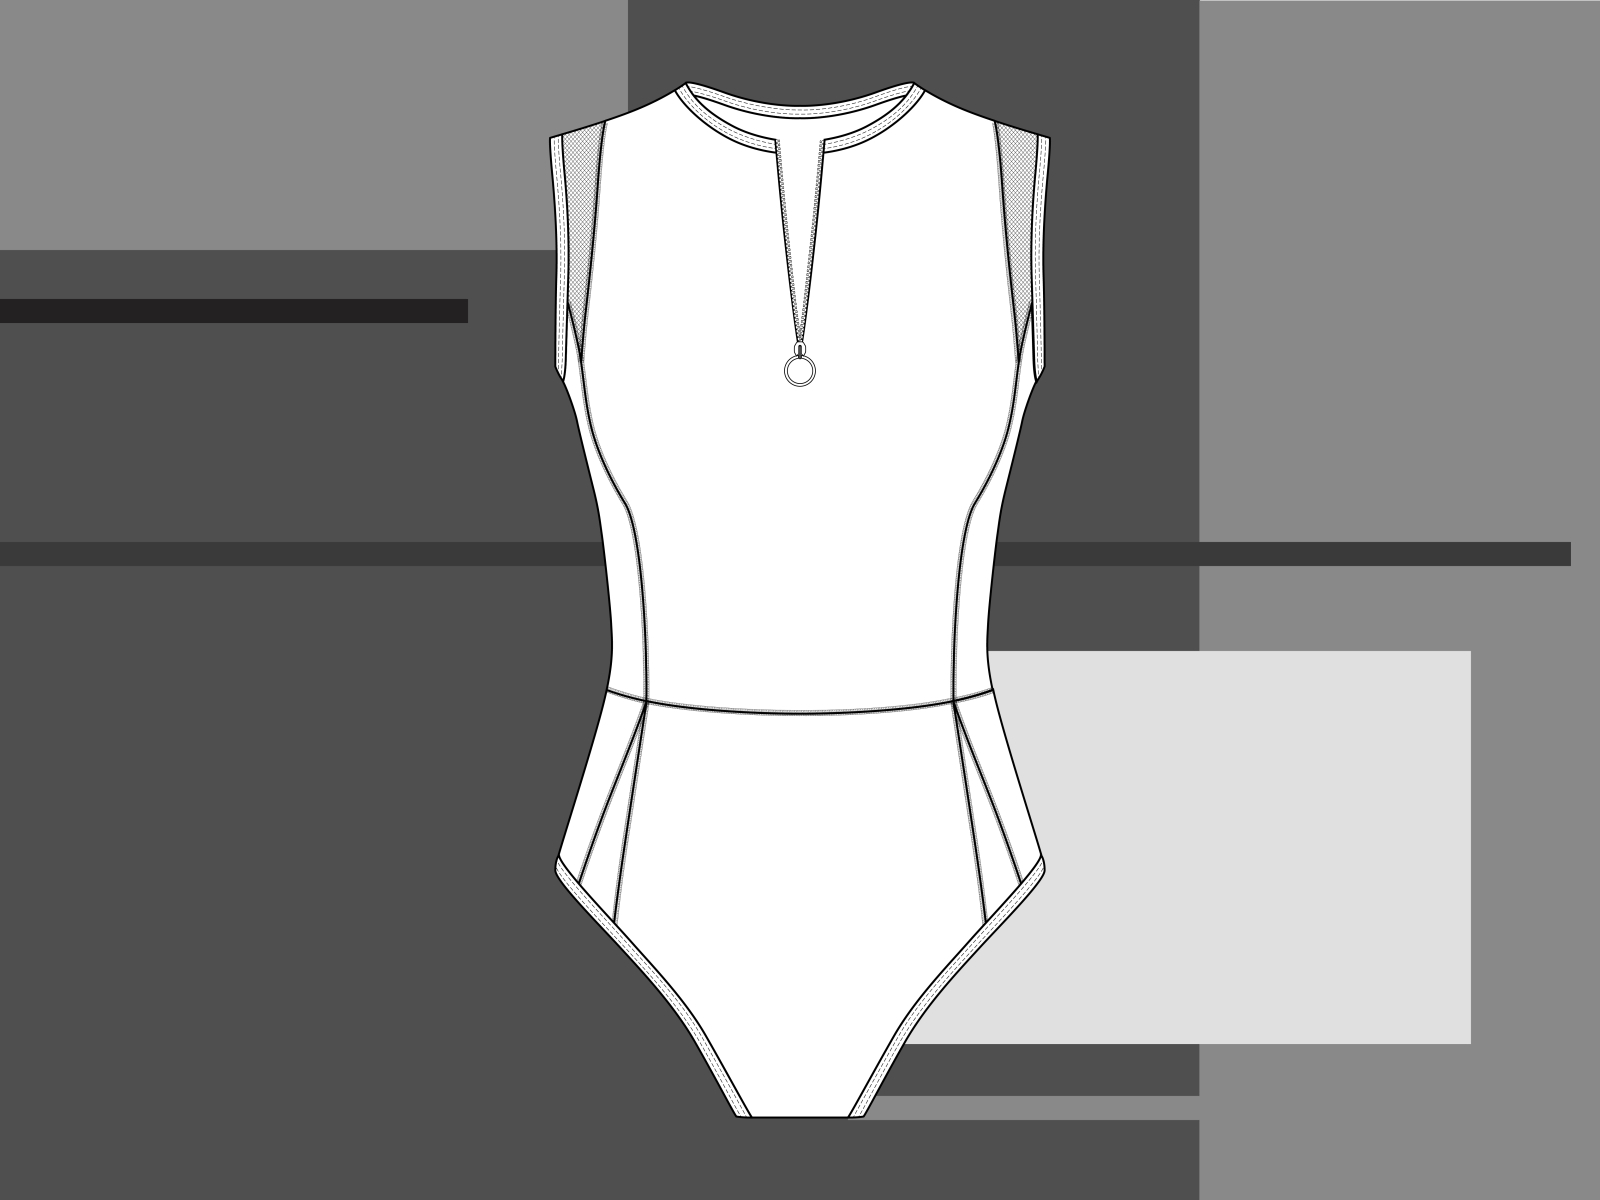 Women's Athletic One Piece Swimsuit - Flat Sketch by Kawintra on Dribbble